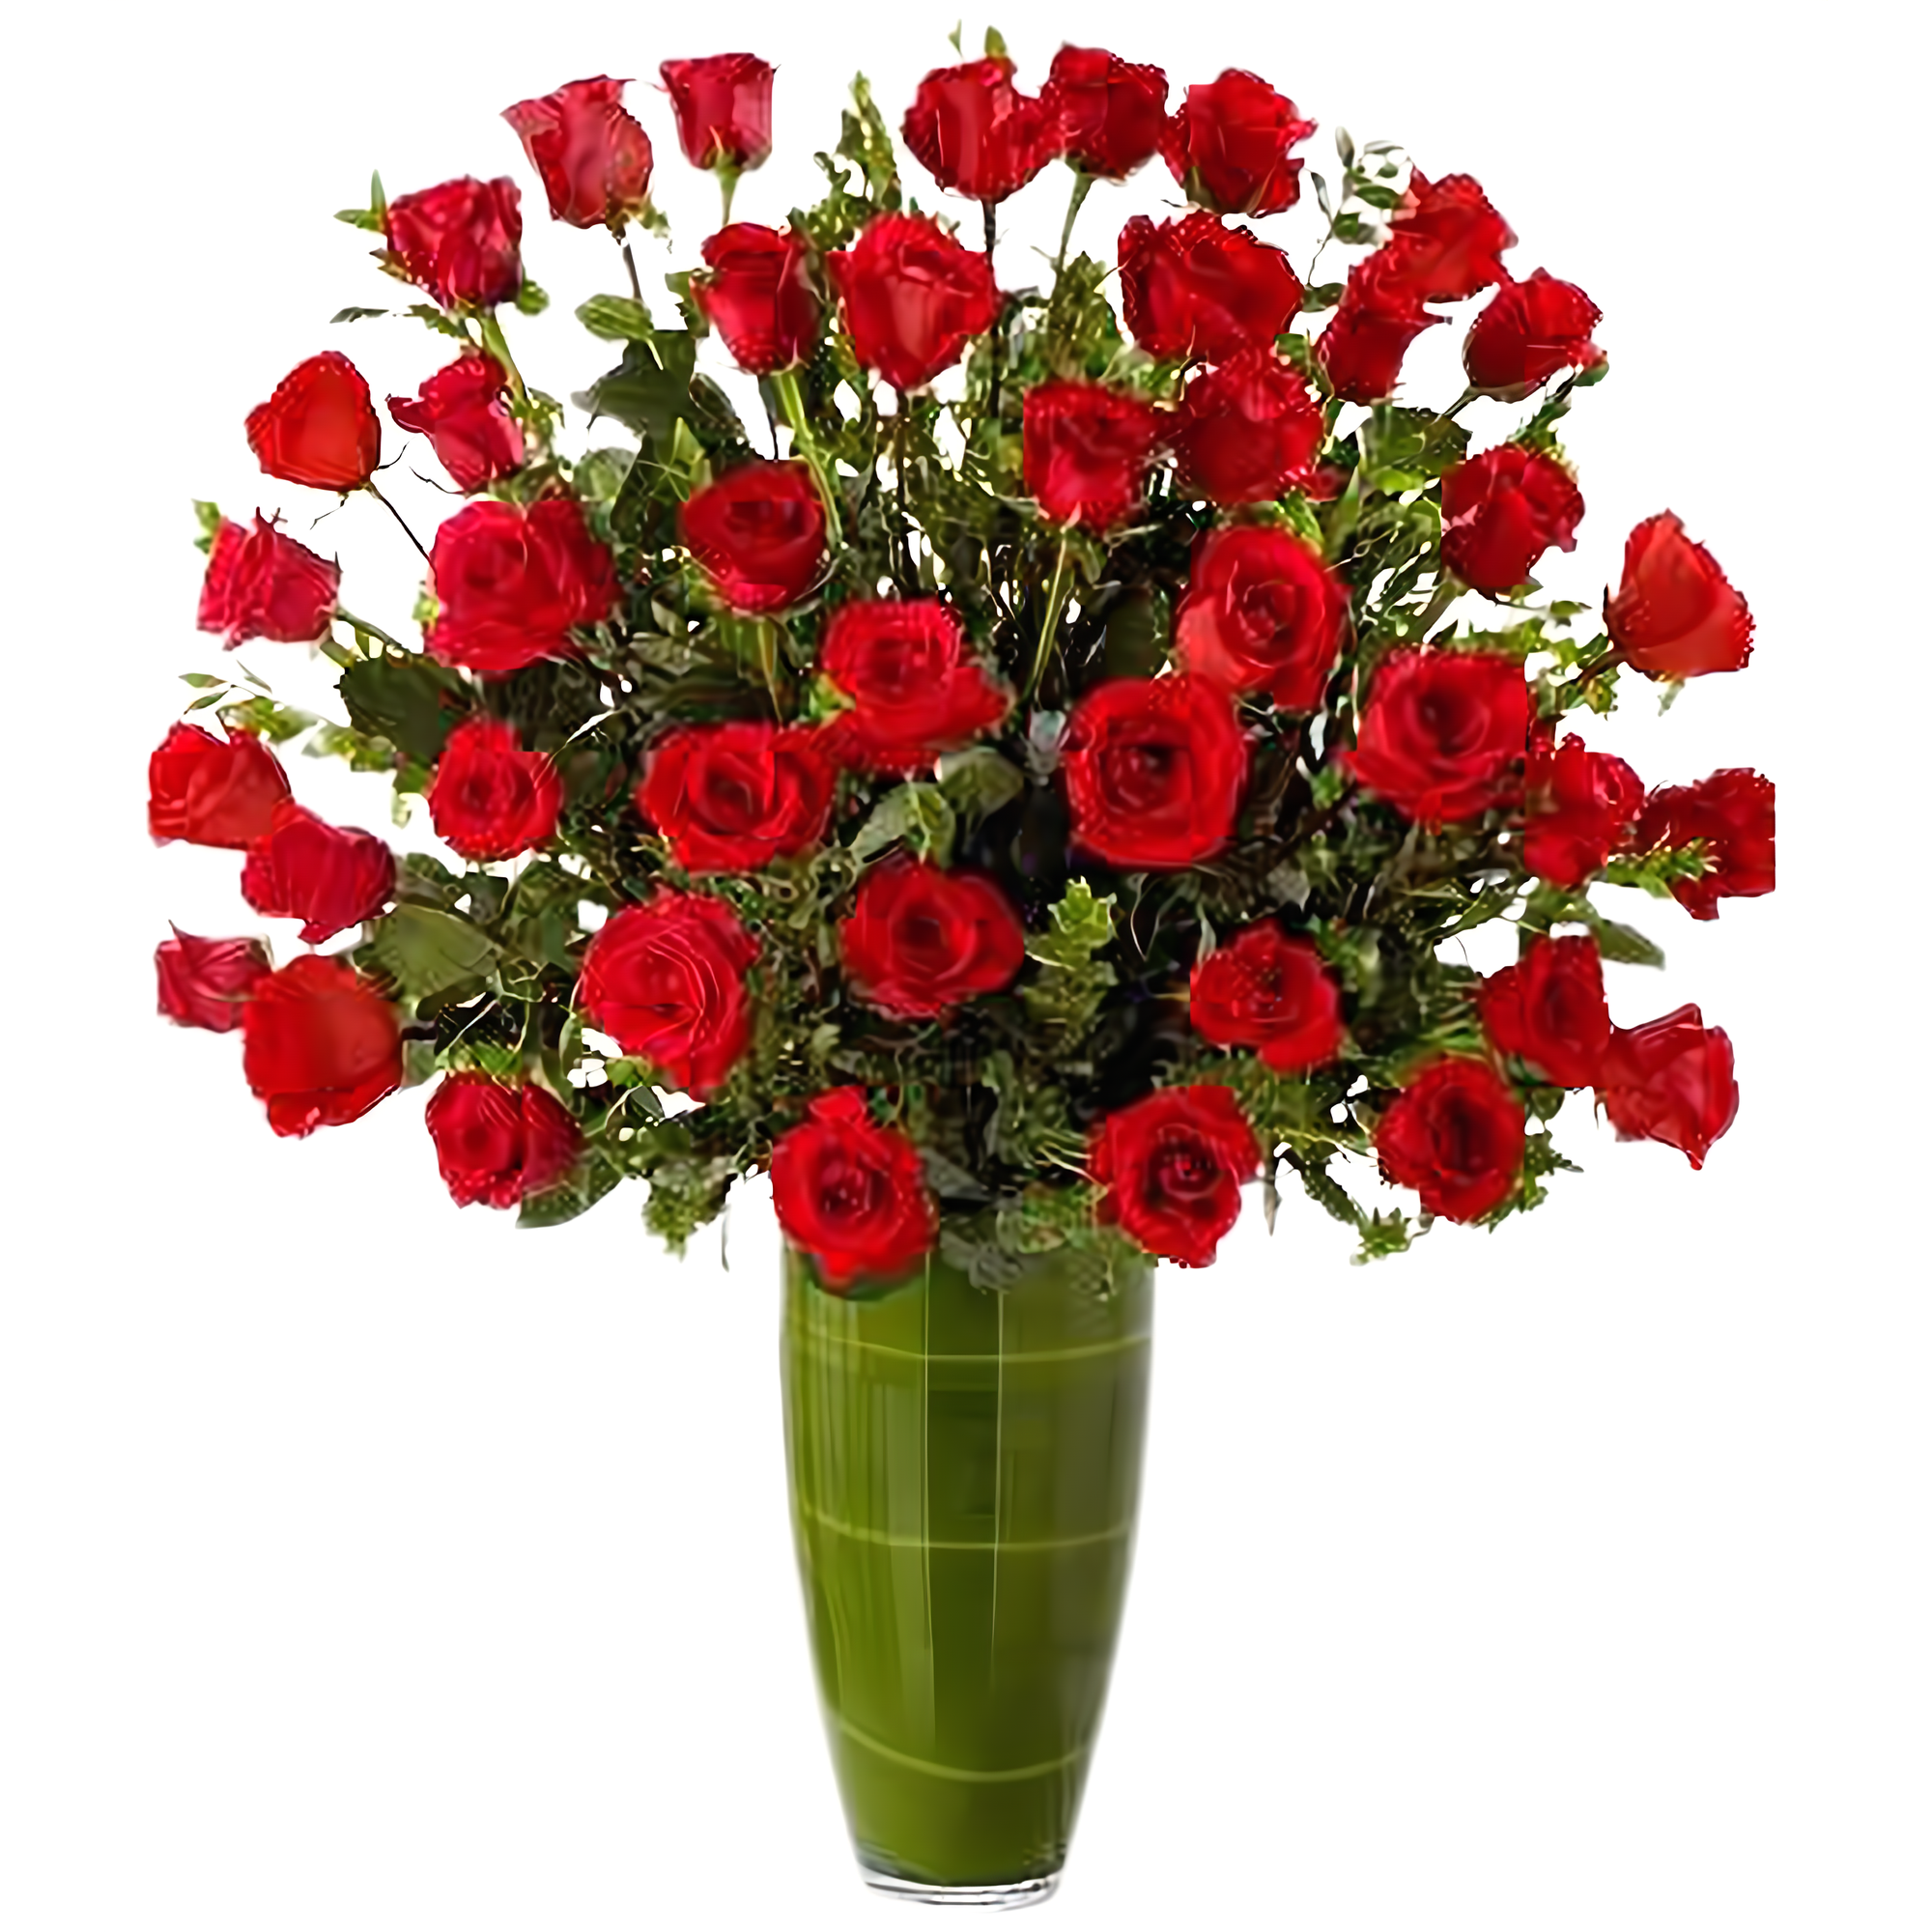 Manhattan Flower Delivery - Luxury Rose Bouquet - 24 Premium Red Long Stem Roses - Products > Luxury Collection